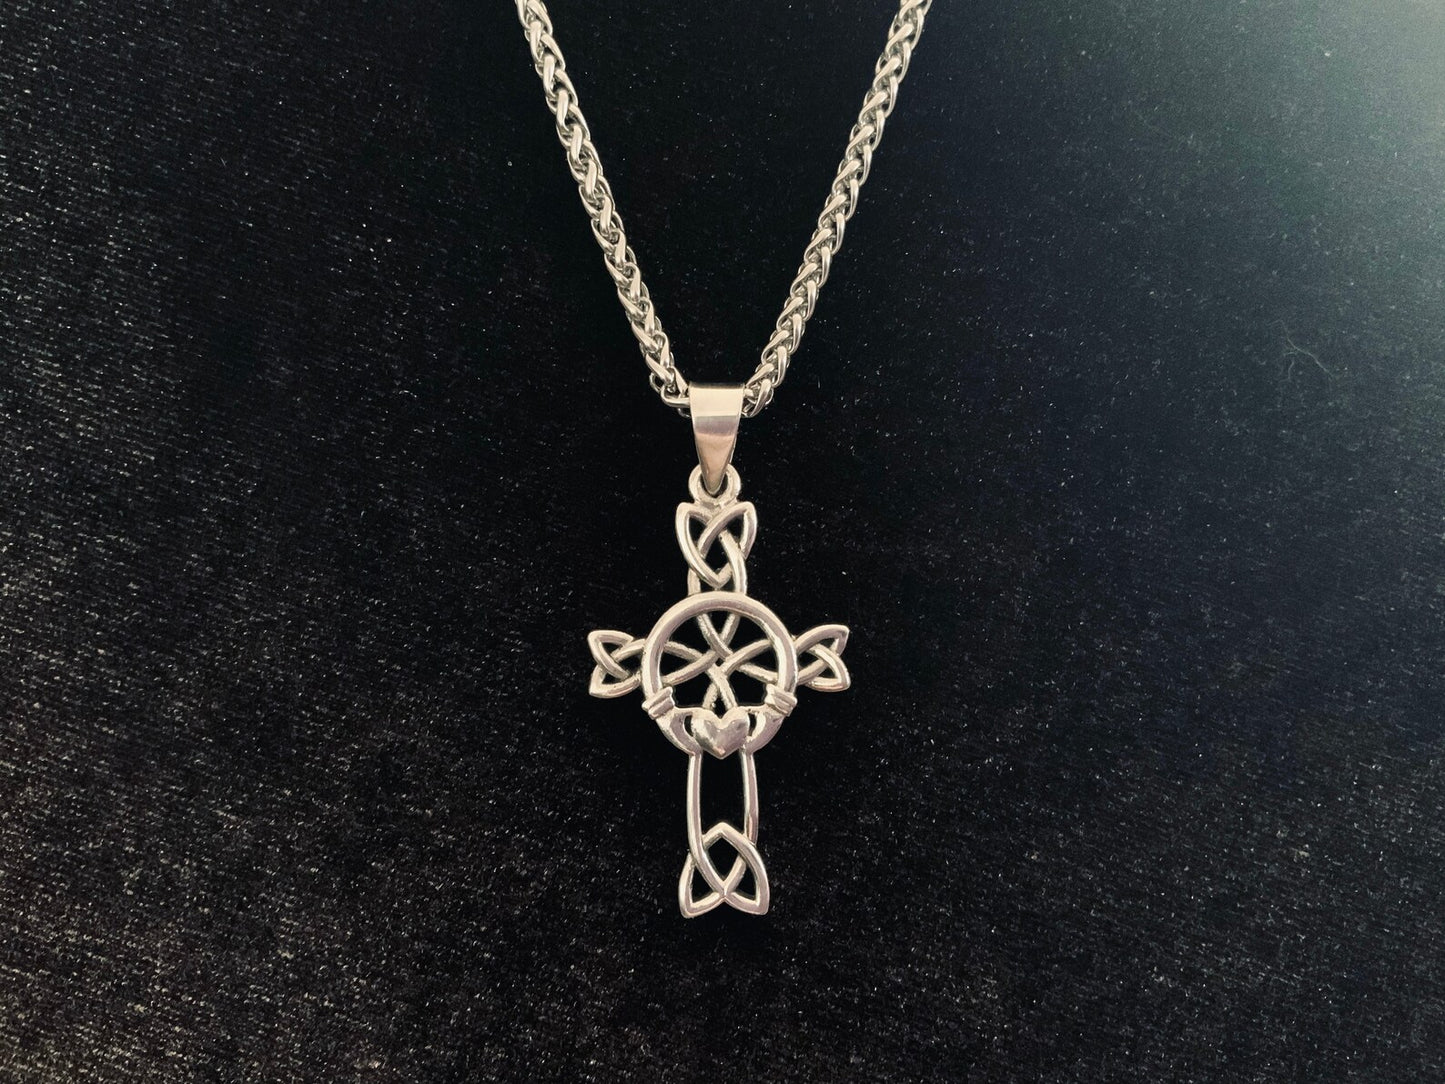 Handcast Large 925 Sterling Silver Unisex Irish Celtic Claddagh Claddaugh Cross Pendant Necklace Free Chain